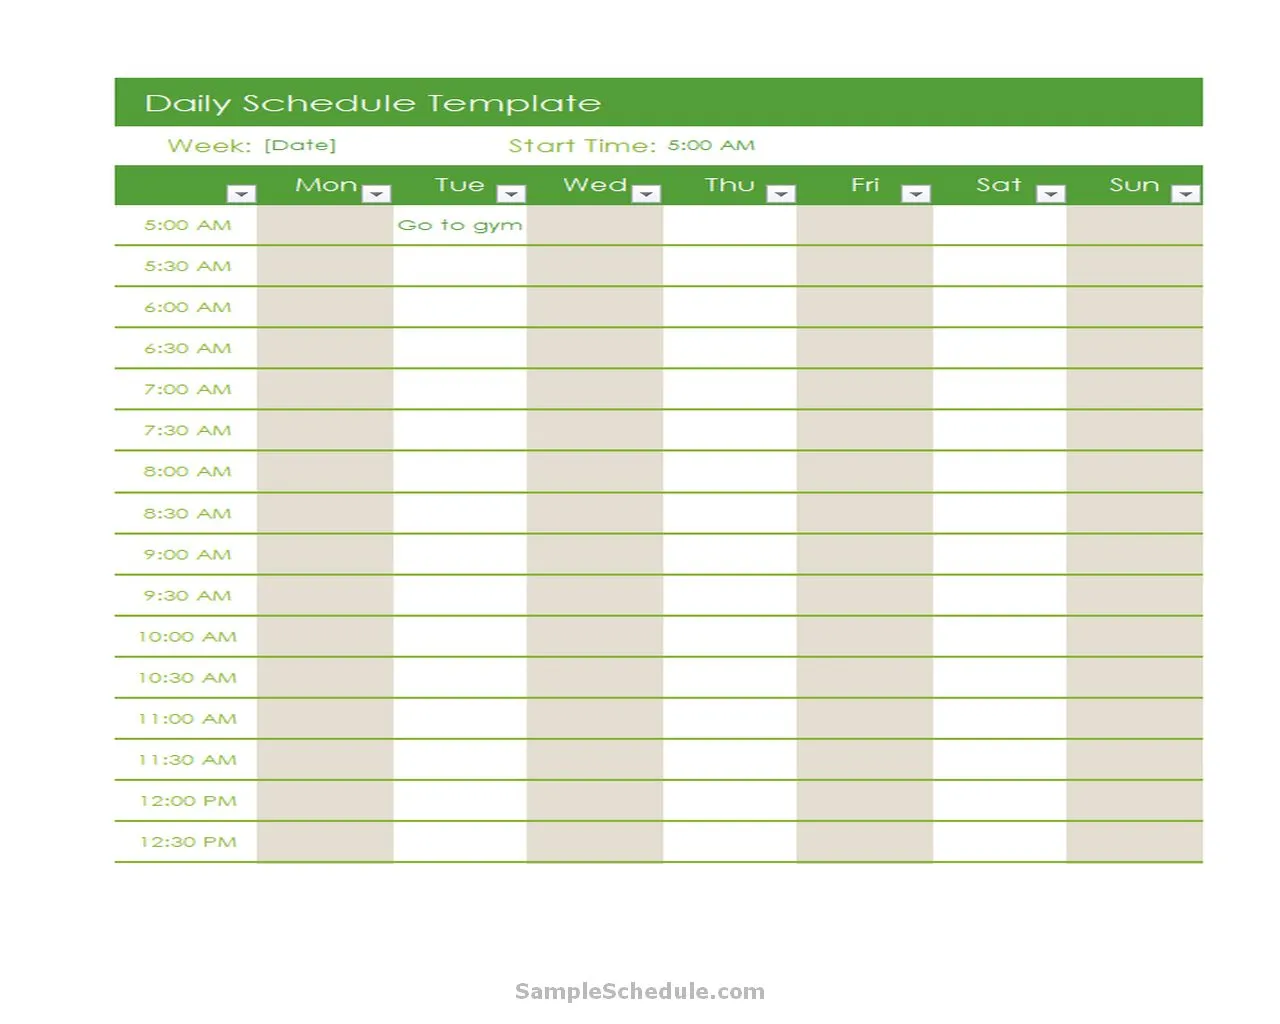 Daily Schedule Template Excel 05